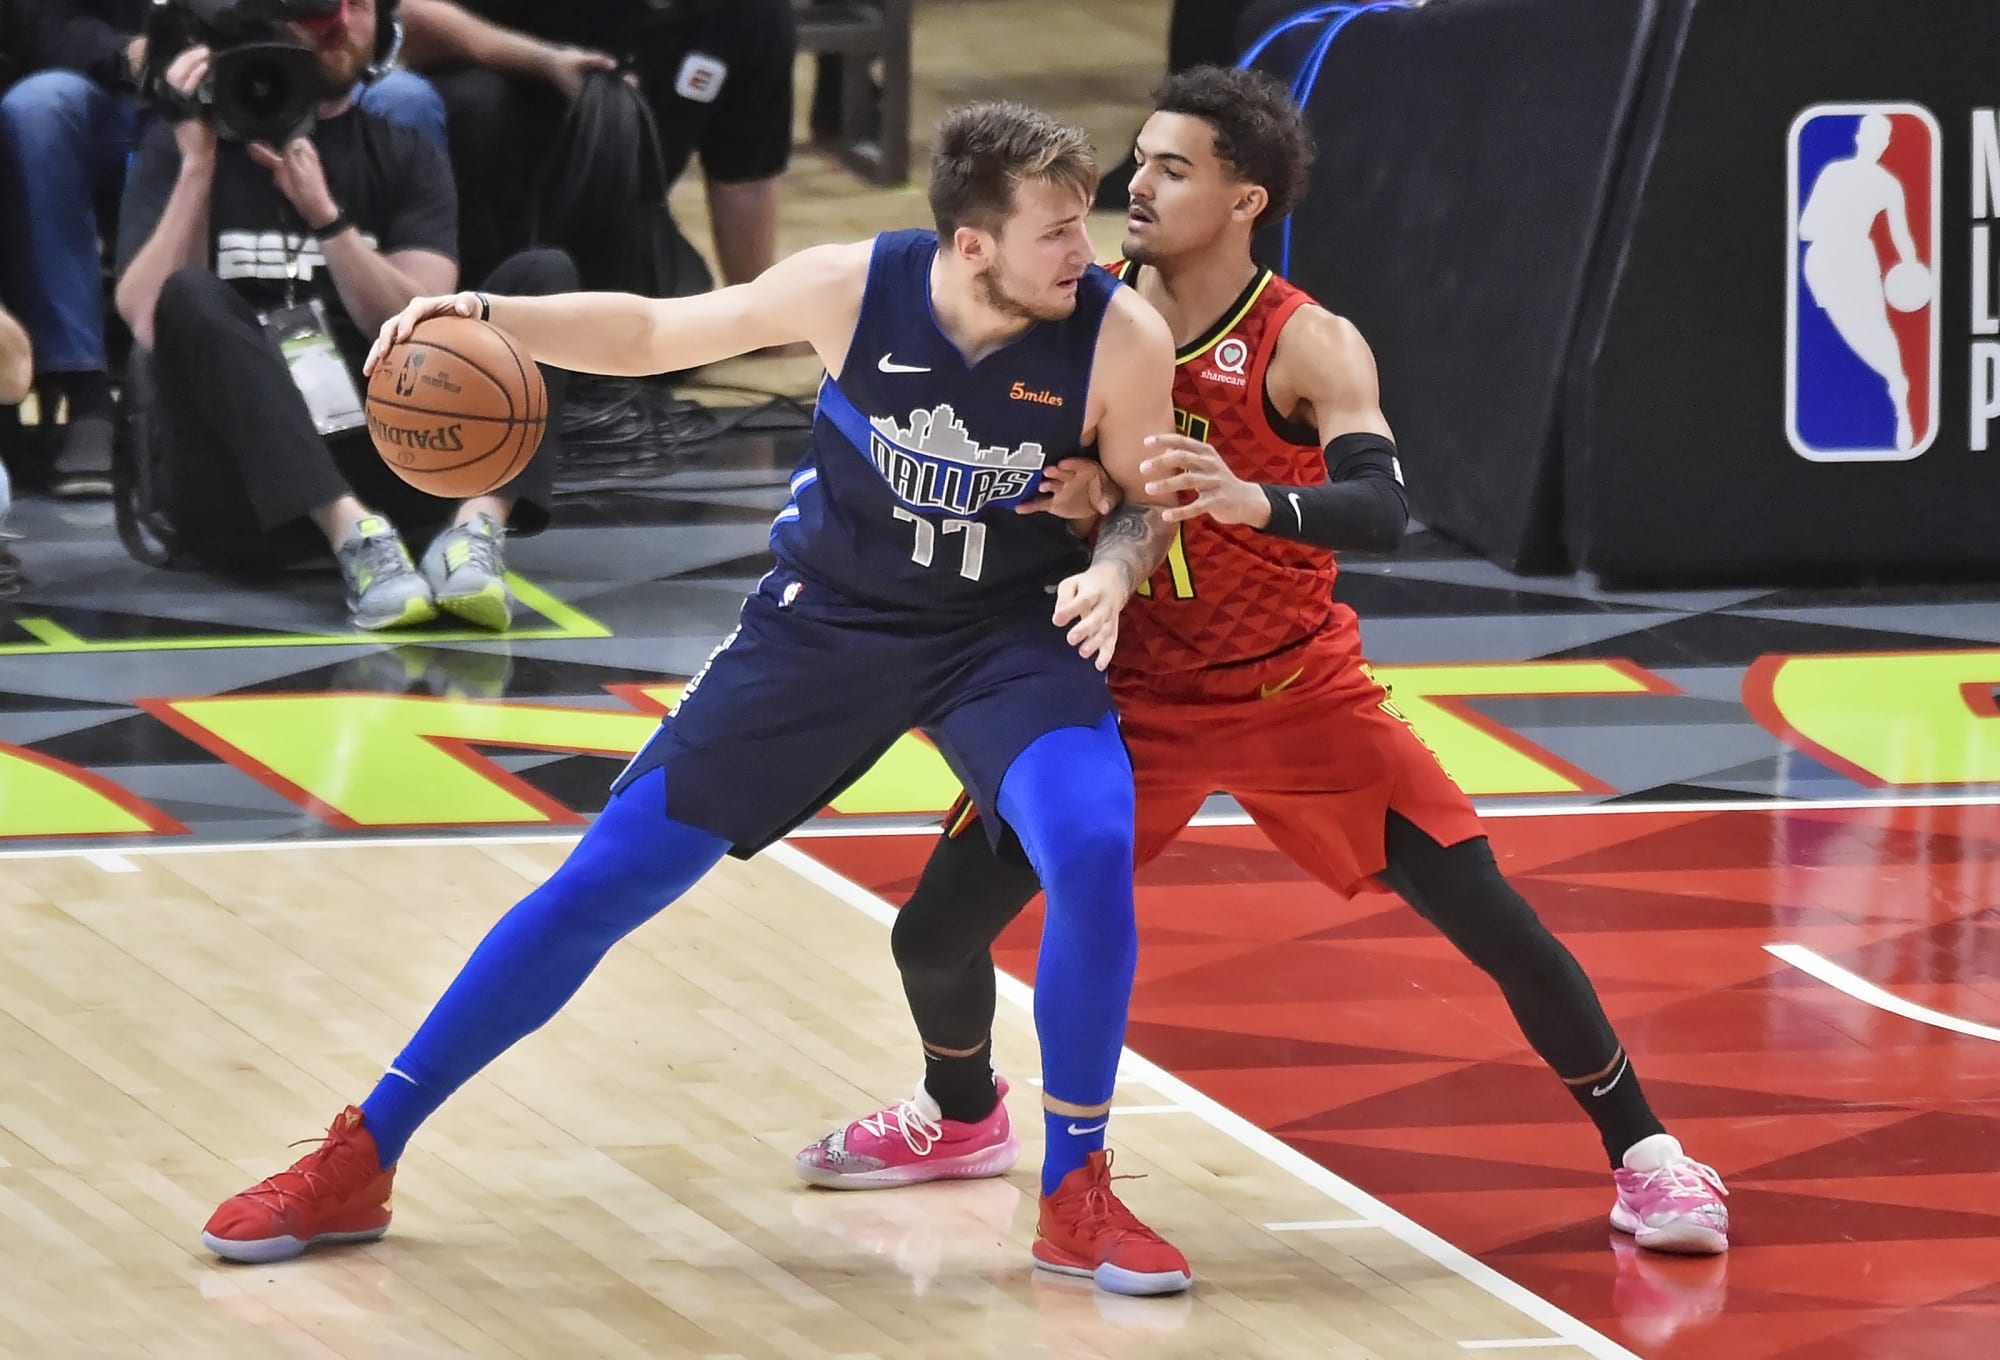 Luka Doncic Wins 2019 NBA Rookie of the Year over Trae Young